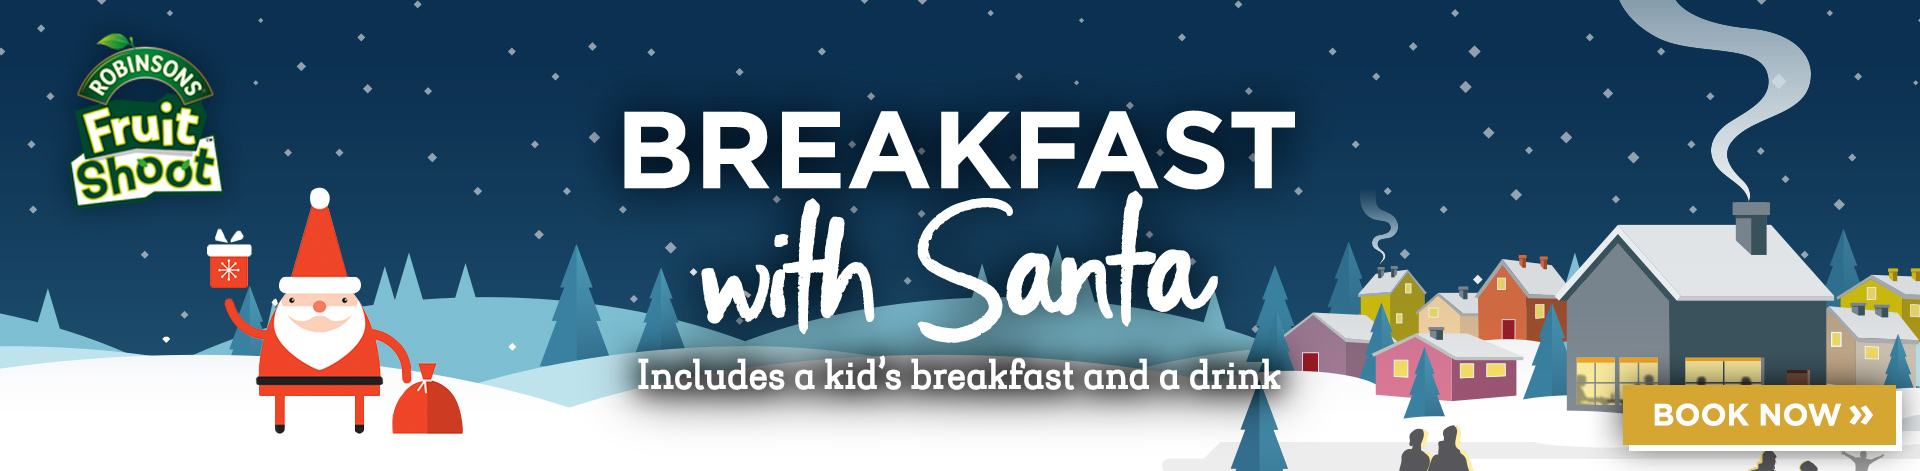 Breakfast with Santa menu at The World Turned Upside Down